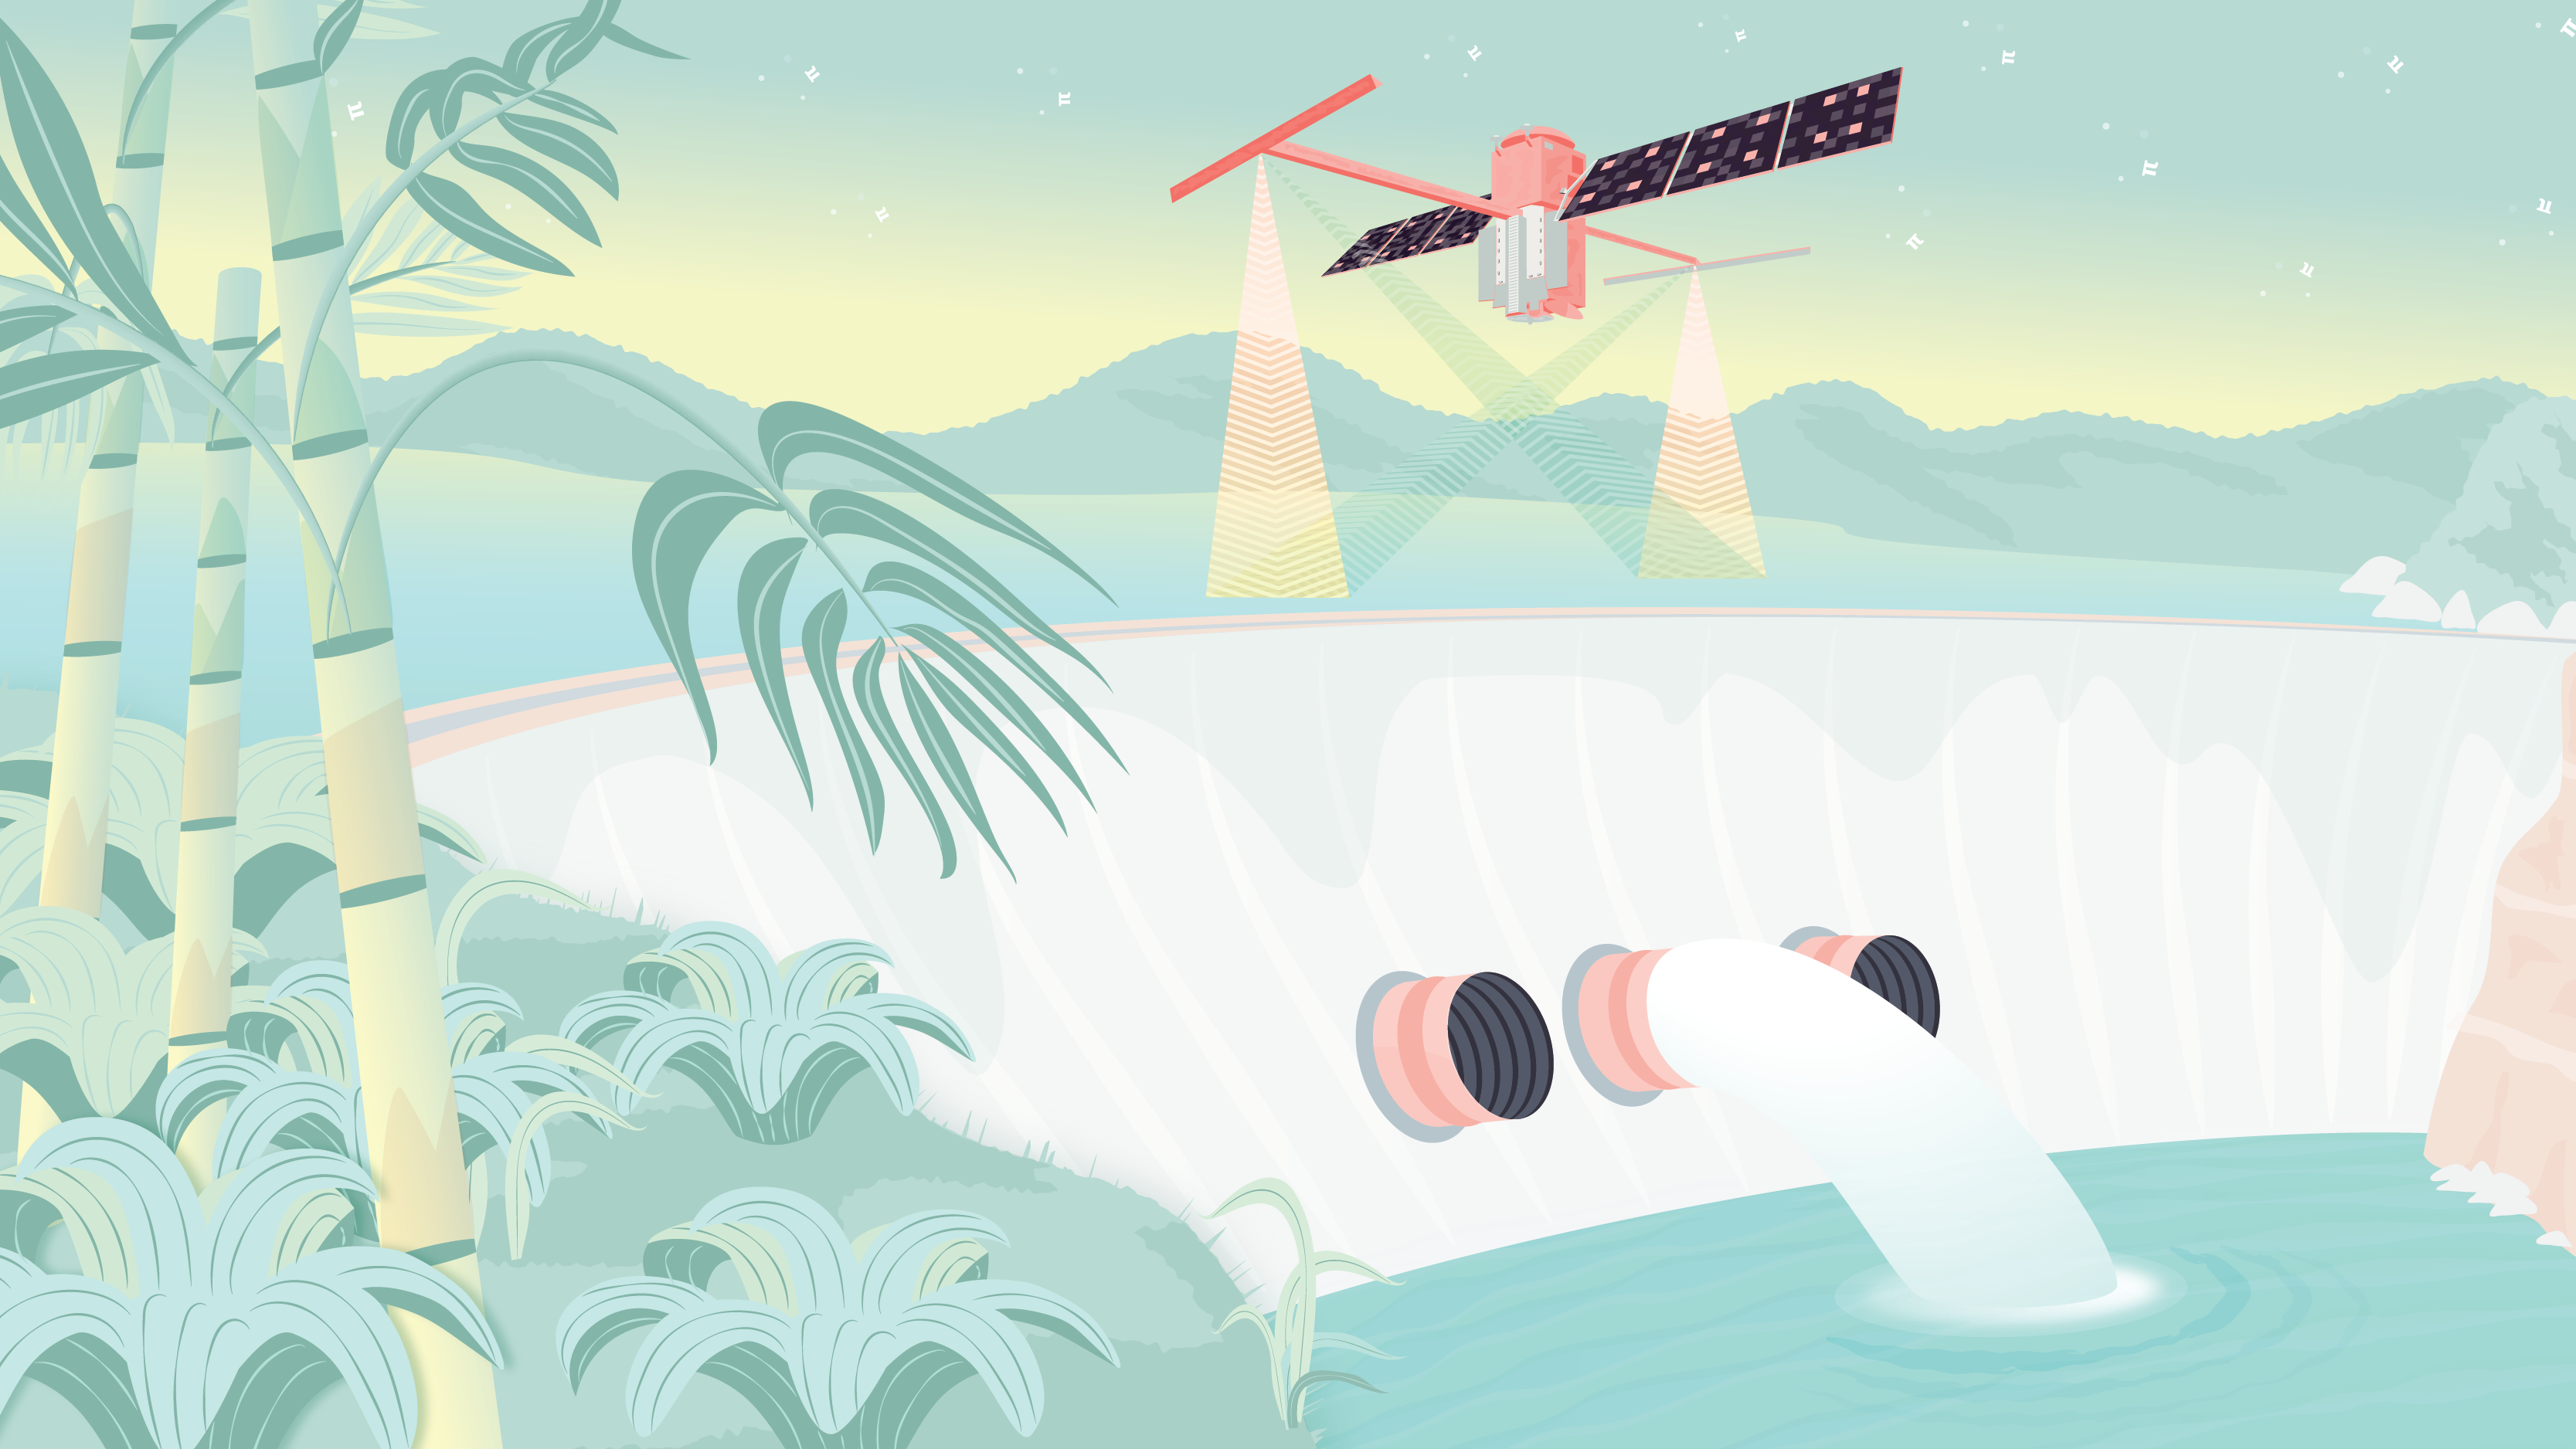 In this whimsical tropical scene, triangular radar beams extend down and bounce back up from either side of the SWOT spacecraft as it flies over a reservoir blocked by a dam. Water flows from one of the cylindrical pipes set into the wall of the dam.